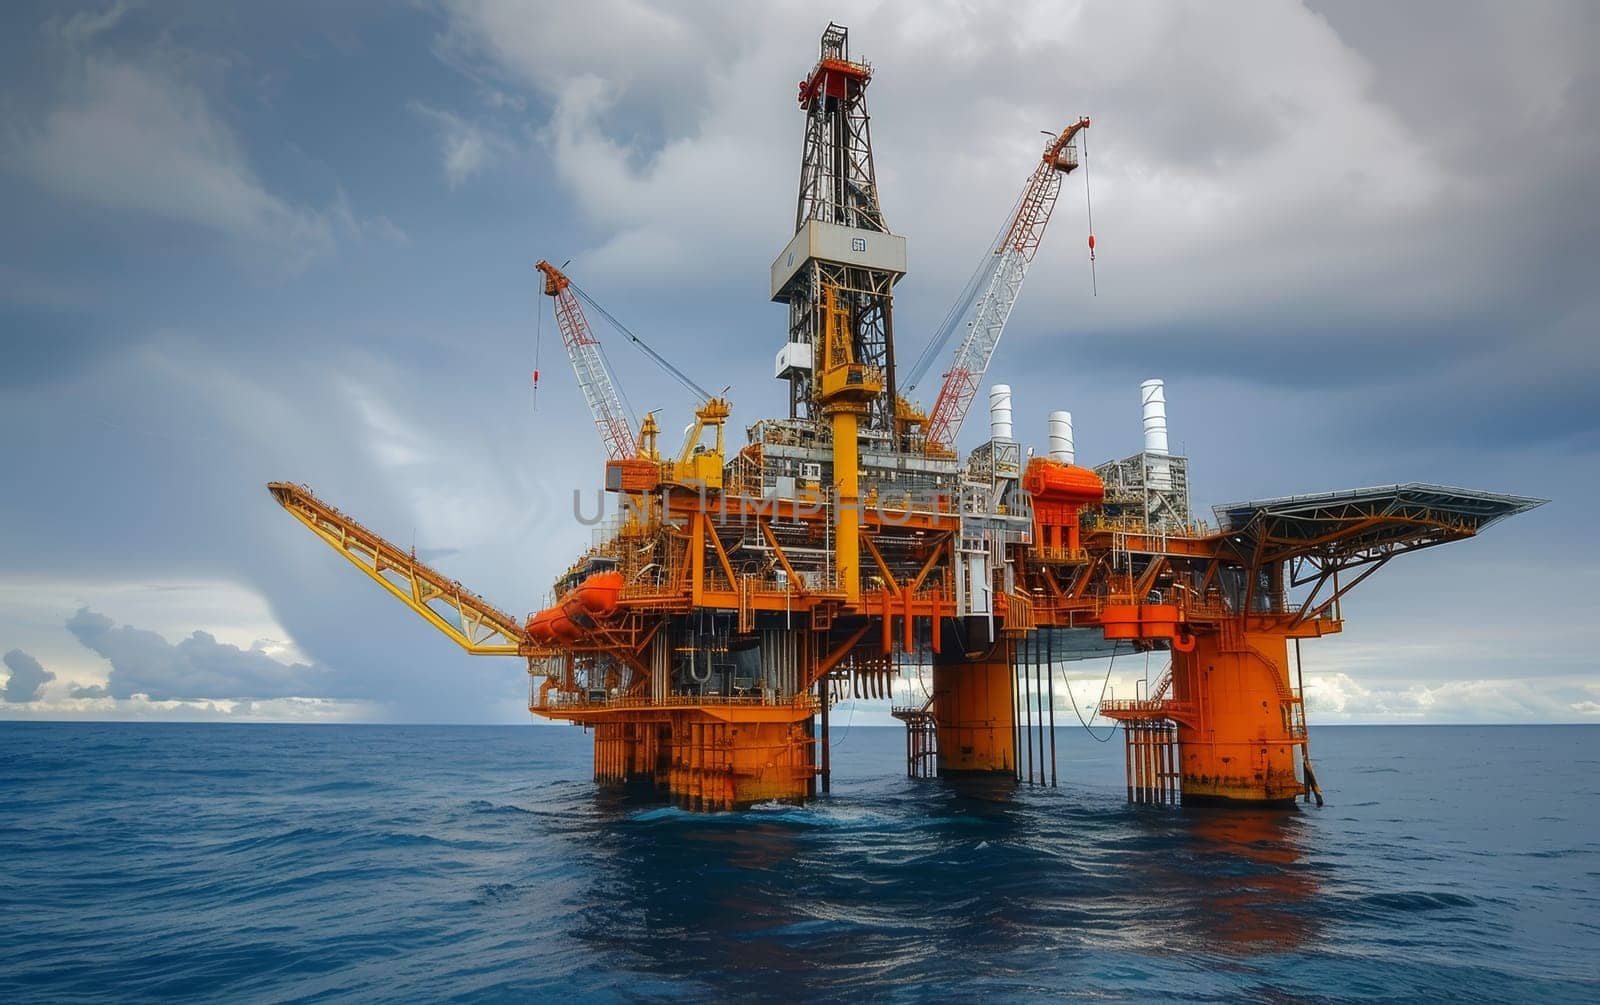 Offshore oil and gas platform in the ocean under a cloudy sky, displaying the complexity of energy infrastructure